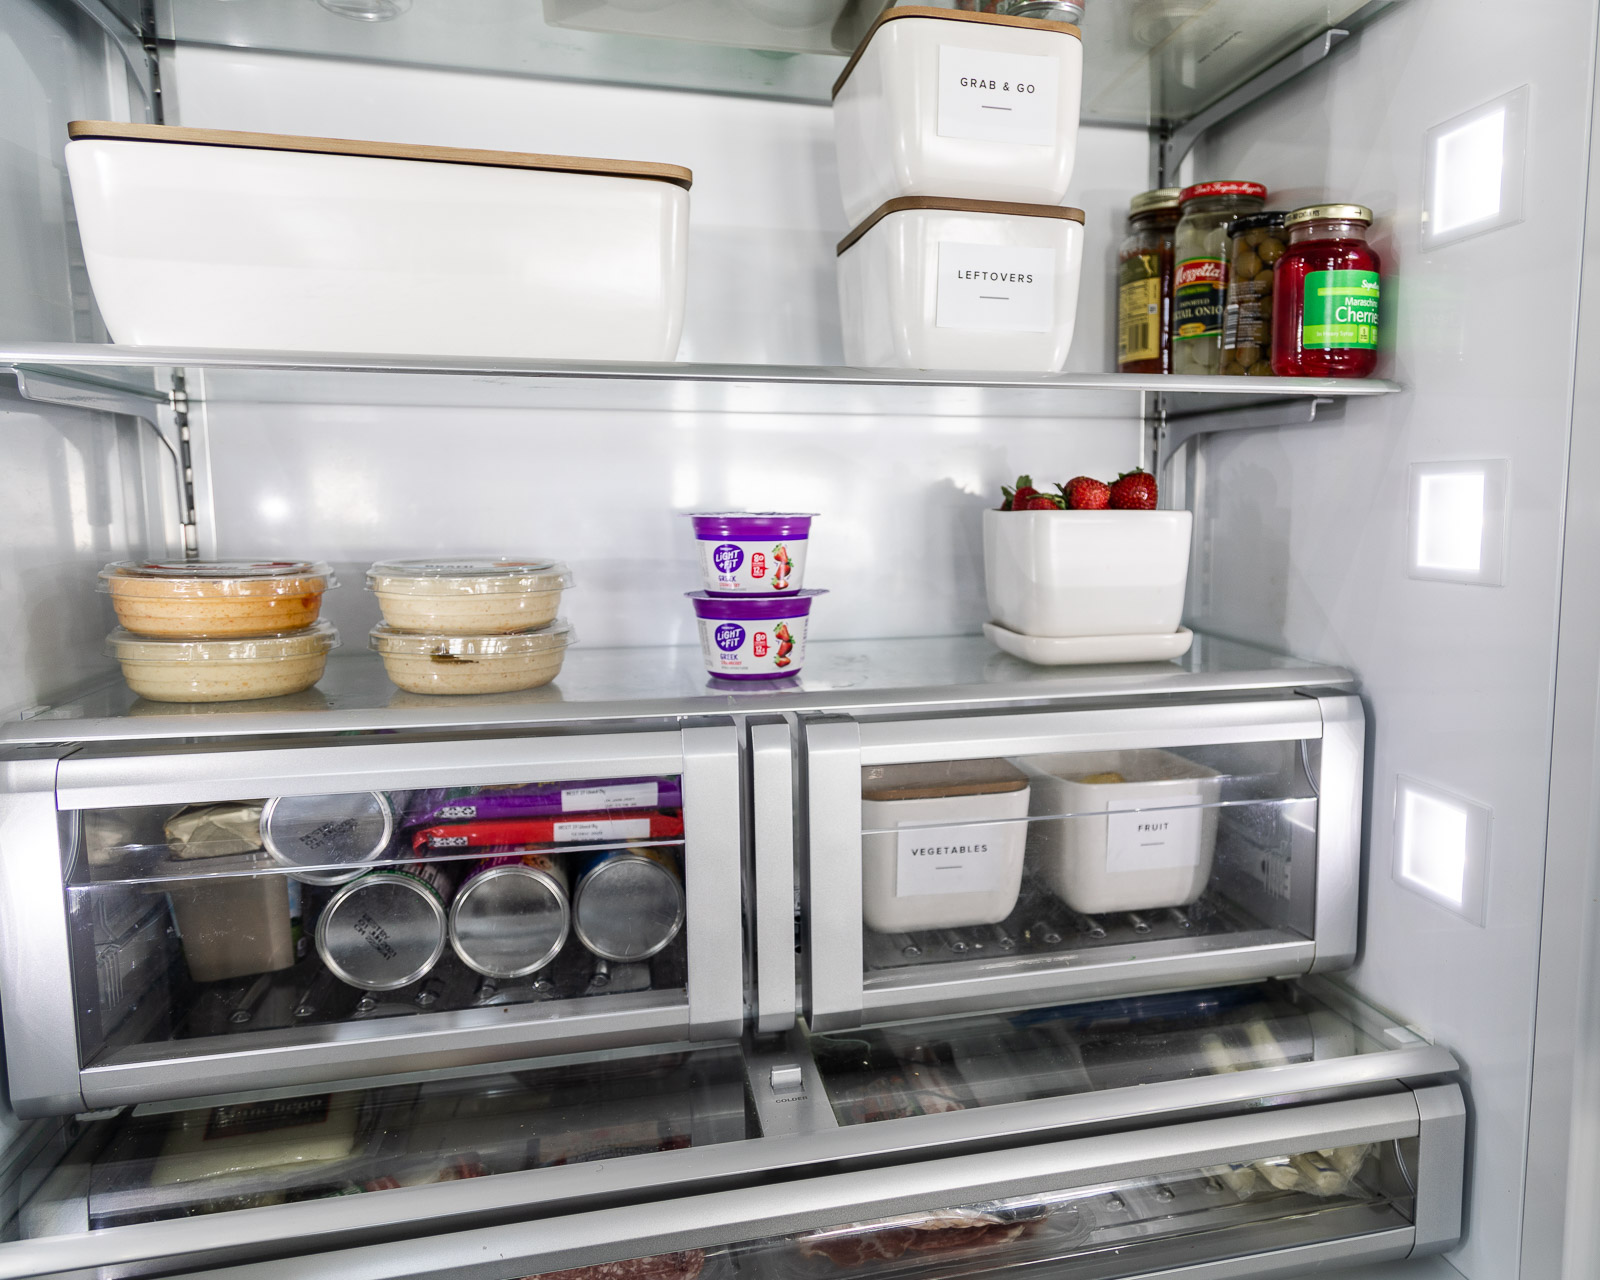 marie-Condo-refrigerator-containers-with-labels-The-Glamorous-Gal